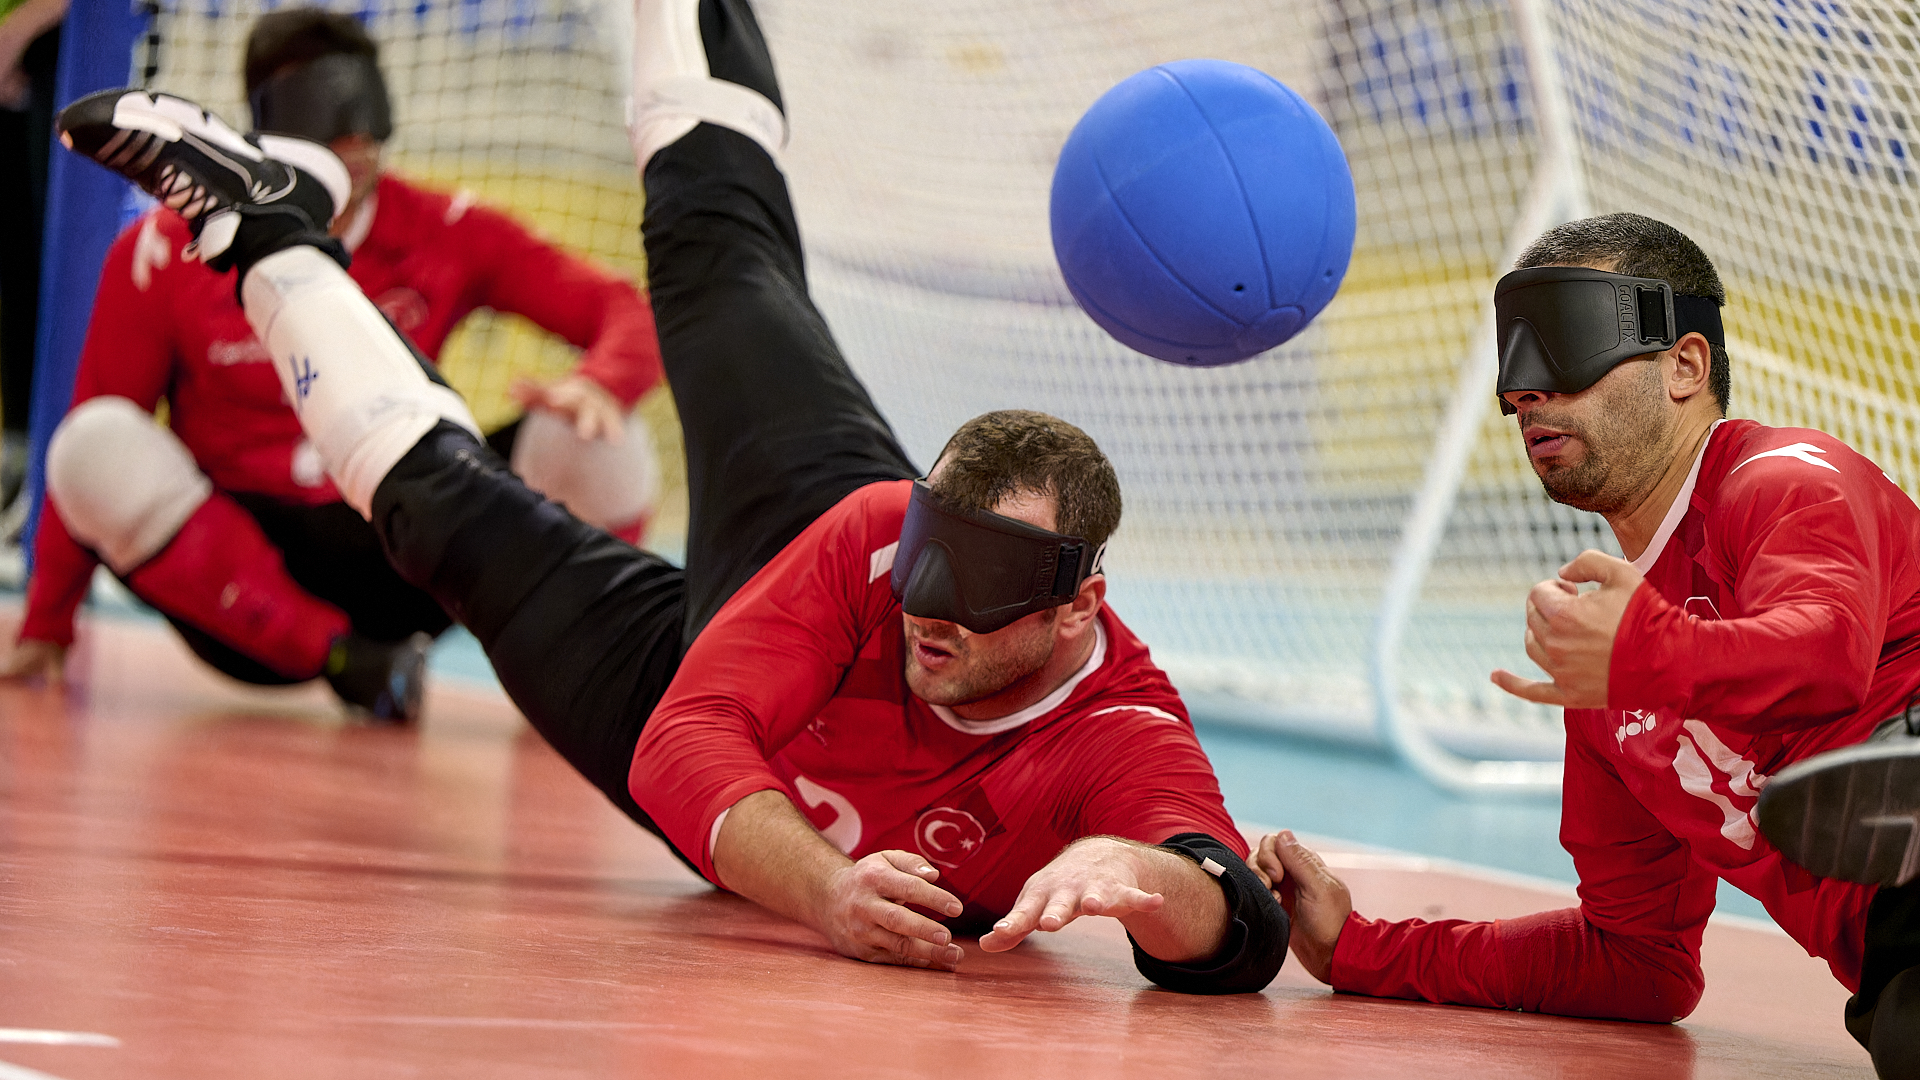 Goalball: Türkiye will face Lithuania in the semifinals of Euro A - International Blind Sports Federation